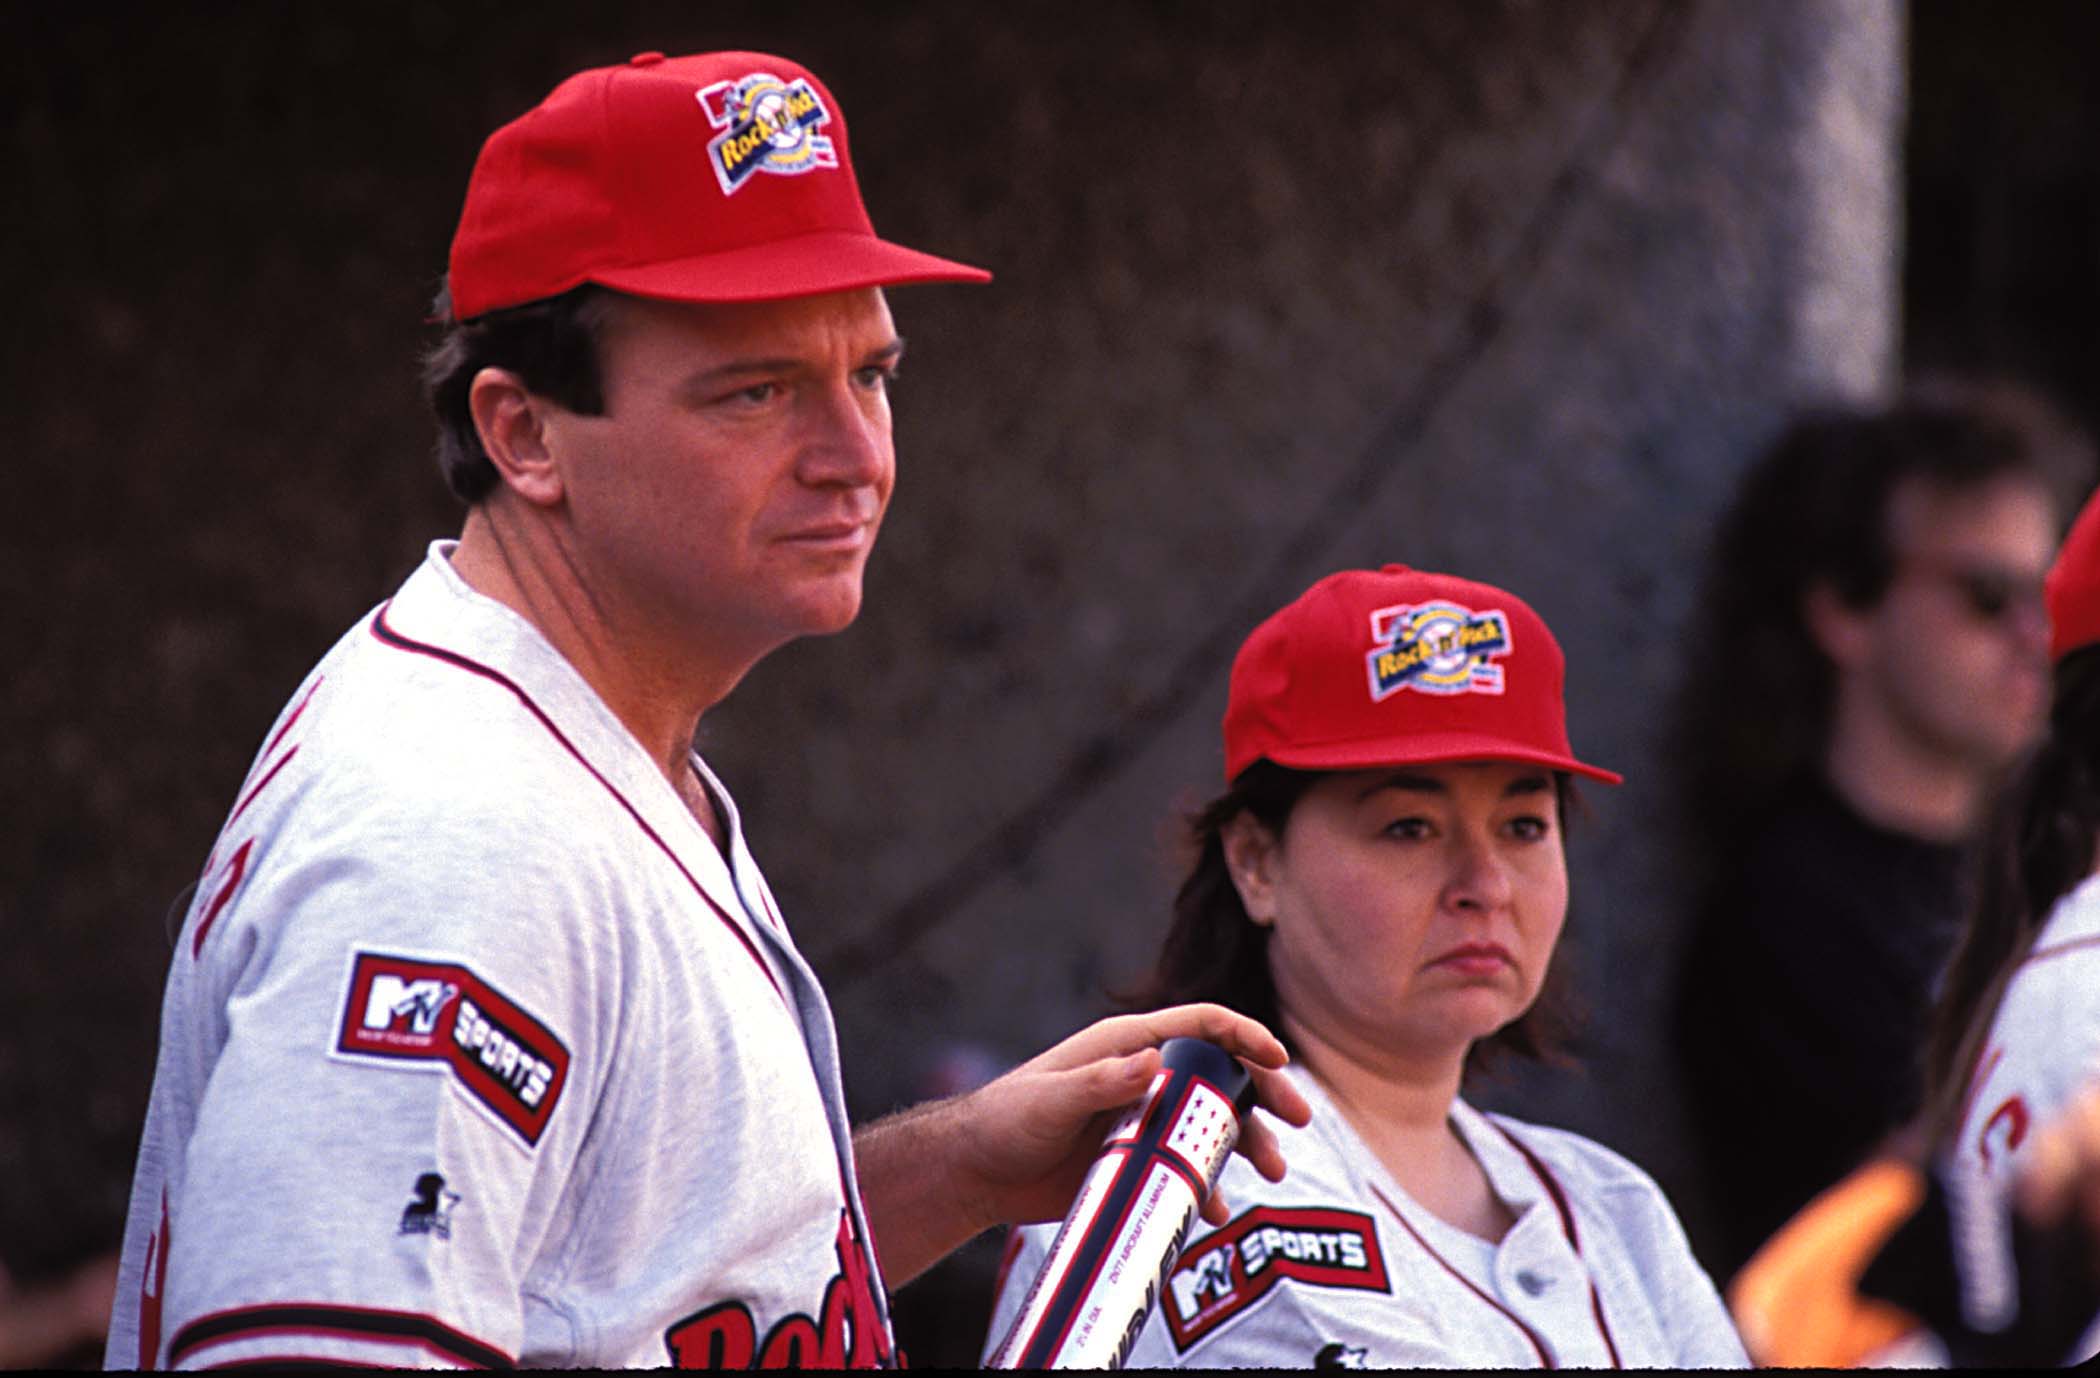 Tom Arnold and Roseanne Barr during MTV's 4nd Annual Rock 'n Jock Softball in Long Beach, California, United States in 1993 | Source: Getty Images